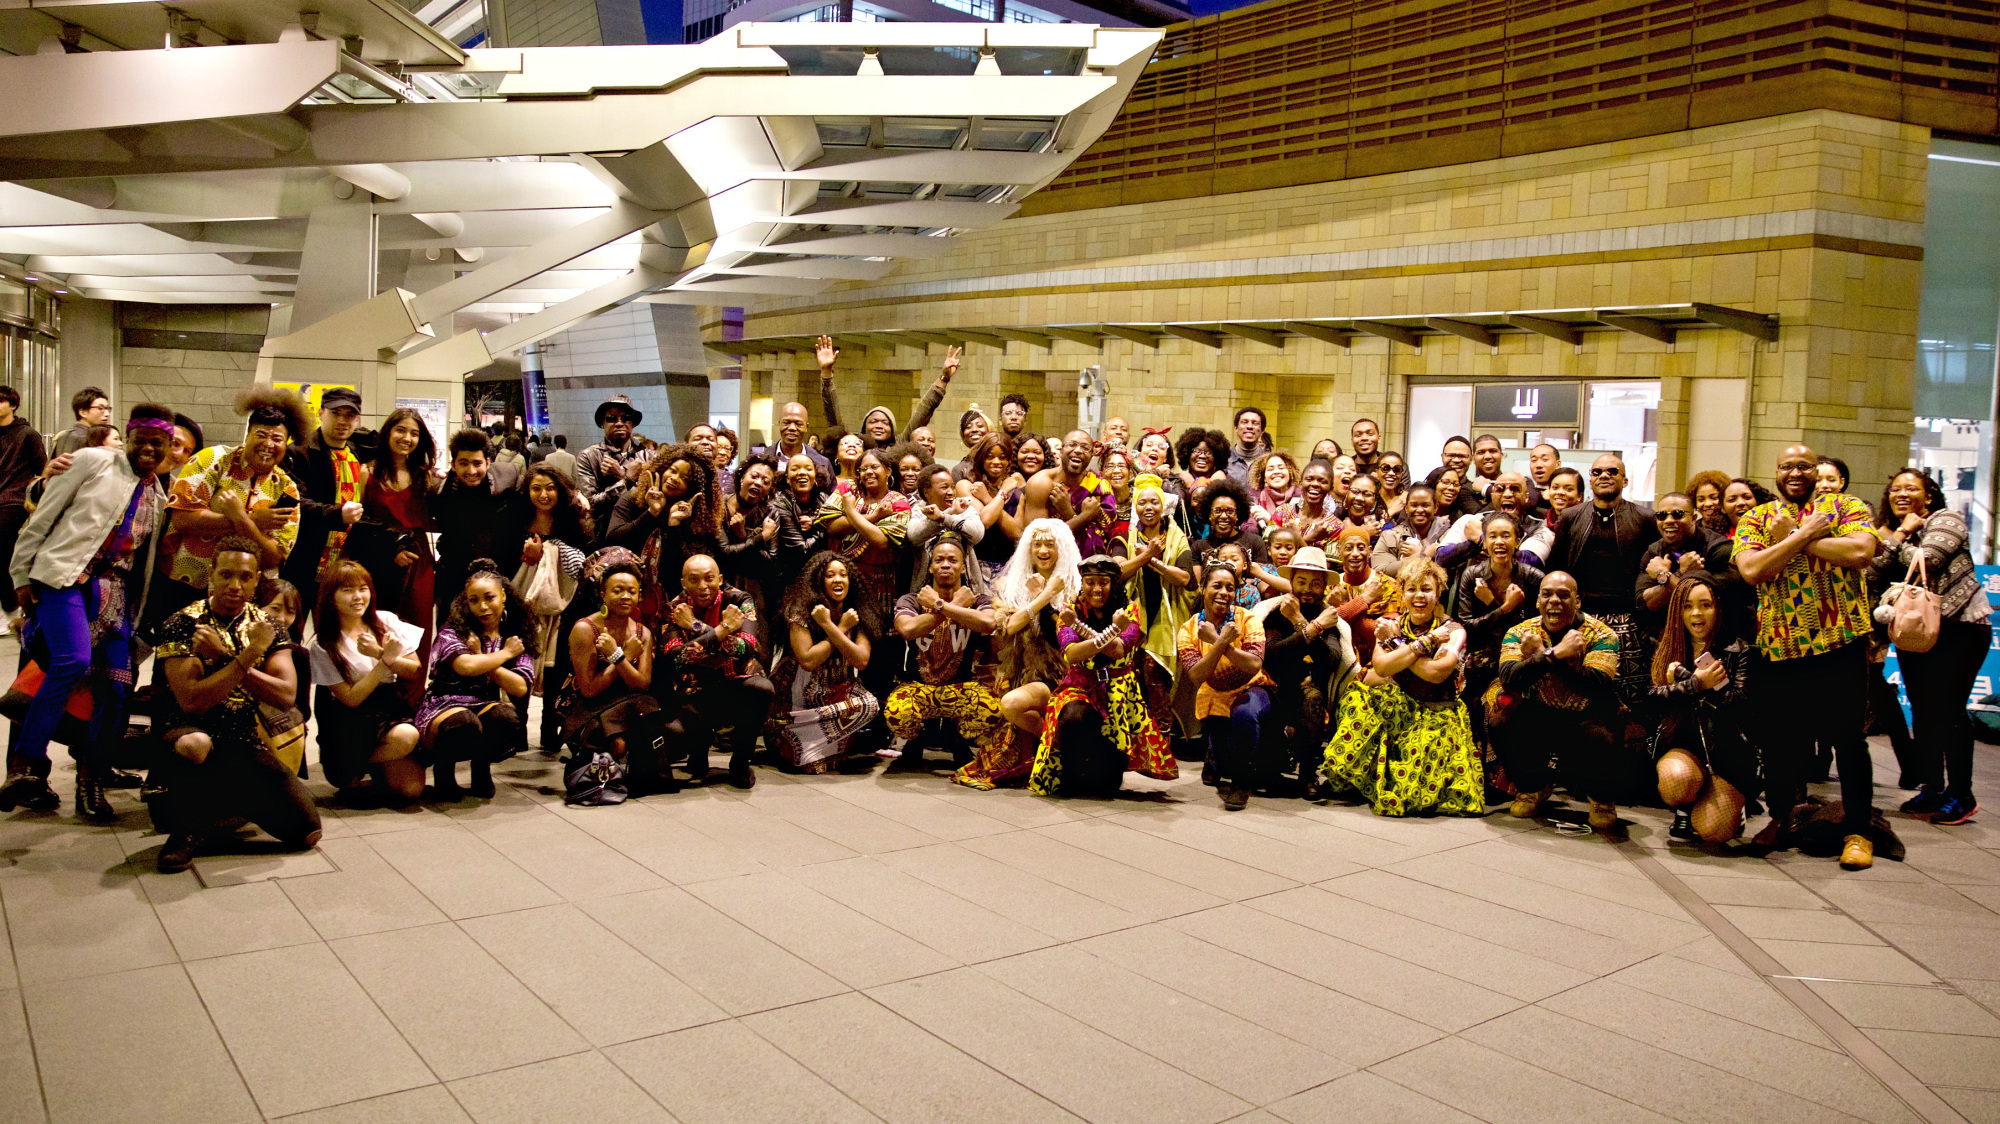 Wakandan delegation: Moviegoers assemble at Roppongi Hills in Tokyo on March 3 for a 'Black Panther' viewing party. | ALEKSANDER DRAGICEVIC